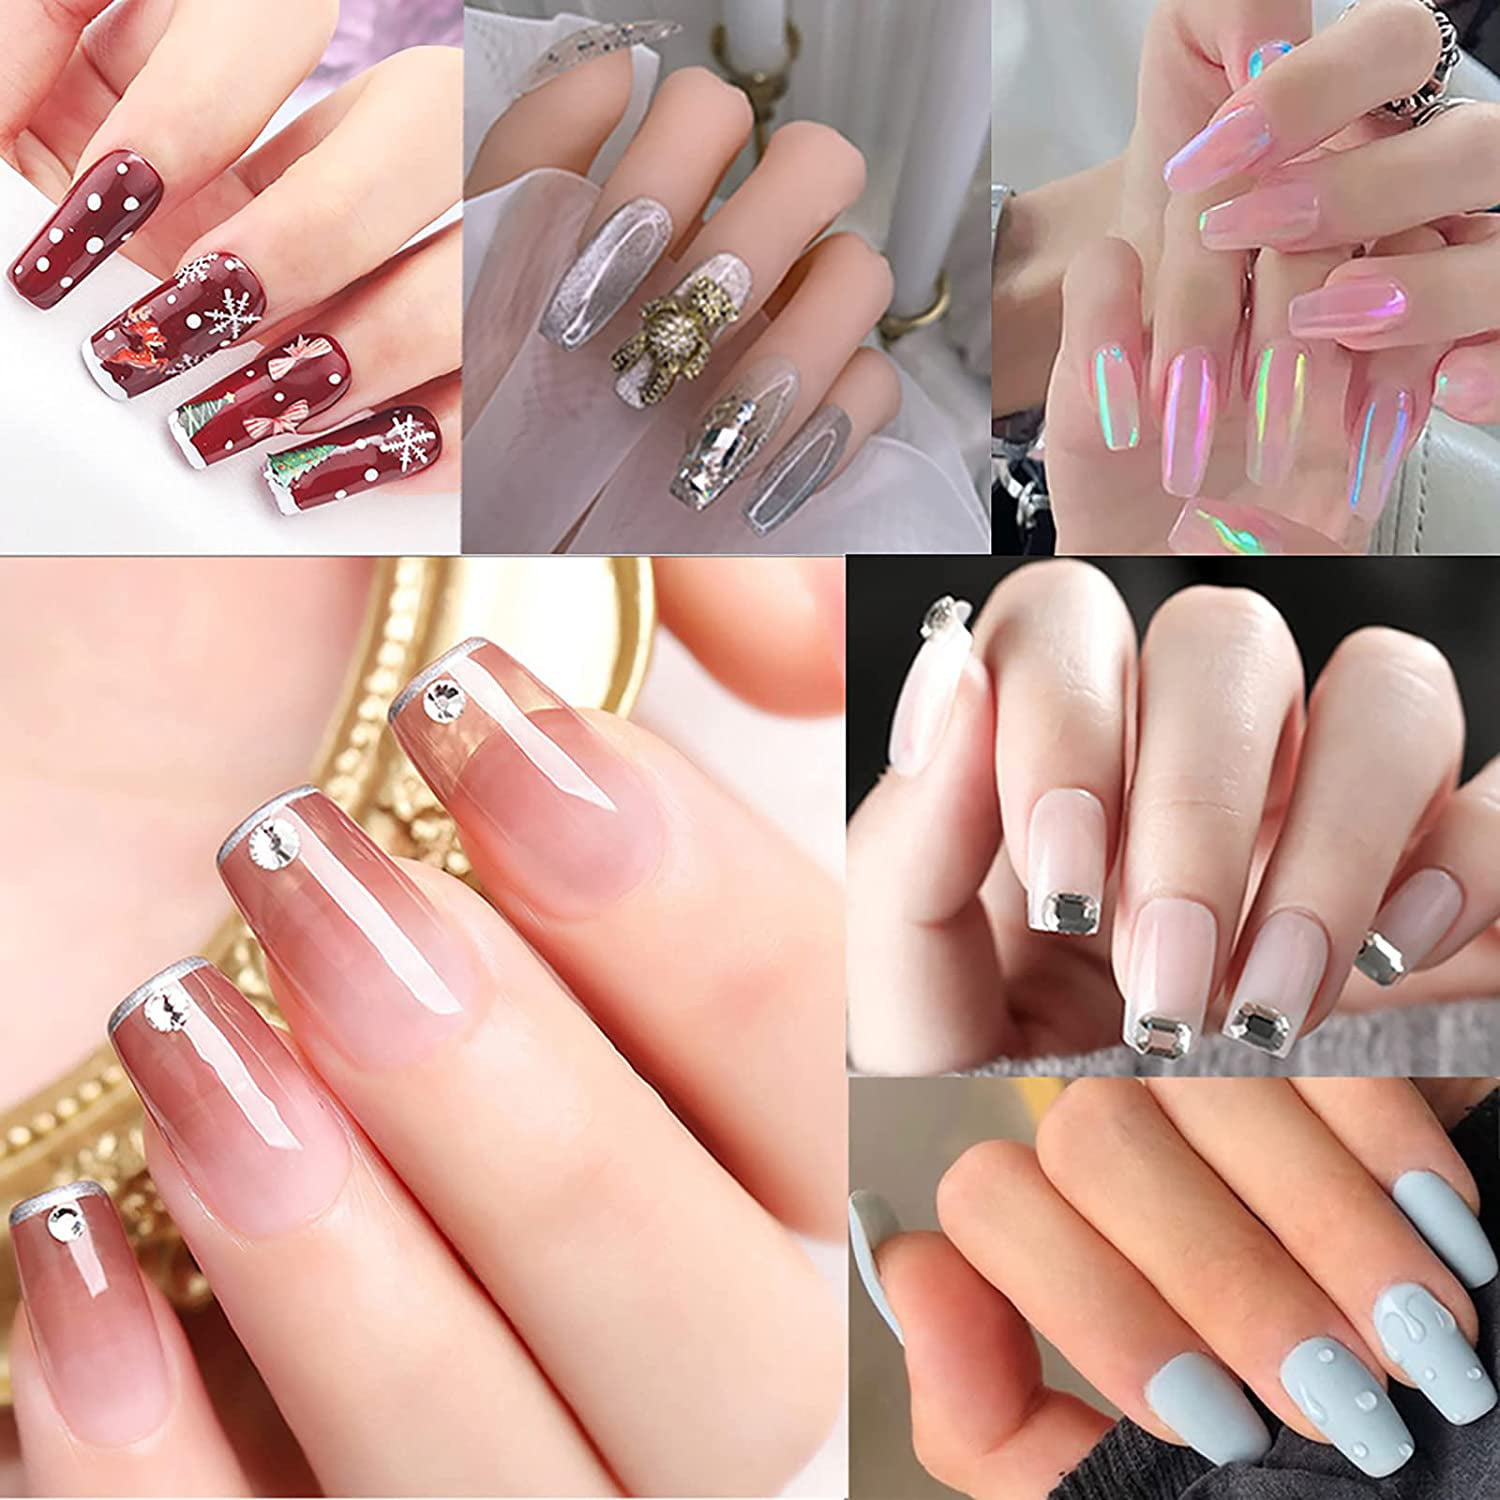 The 20 Nail Story - The almond shape nails with beautiful seashell design.  Trending in 2019. For lavish nail designs and beautiful nail art visit The  20 Nail Story today! Talk to